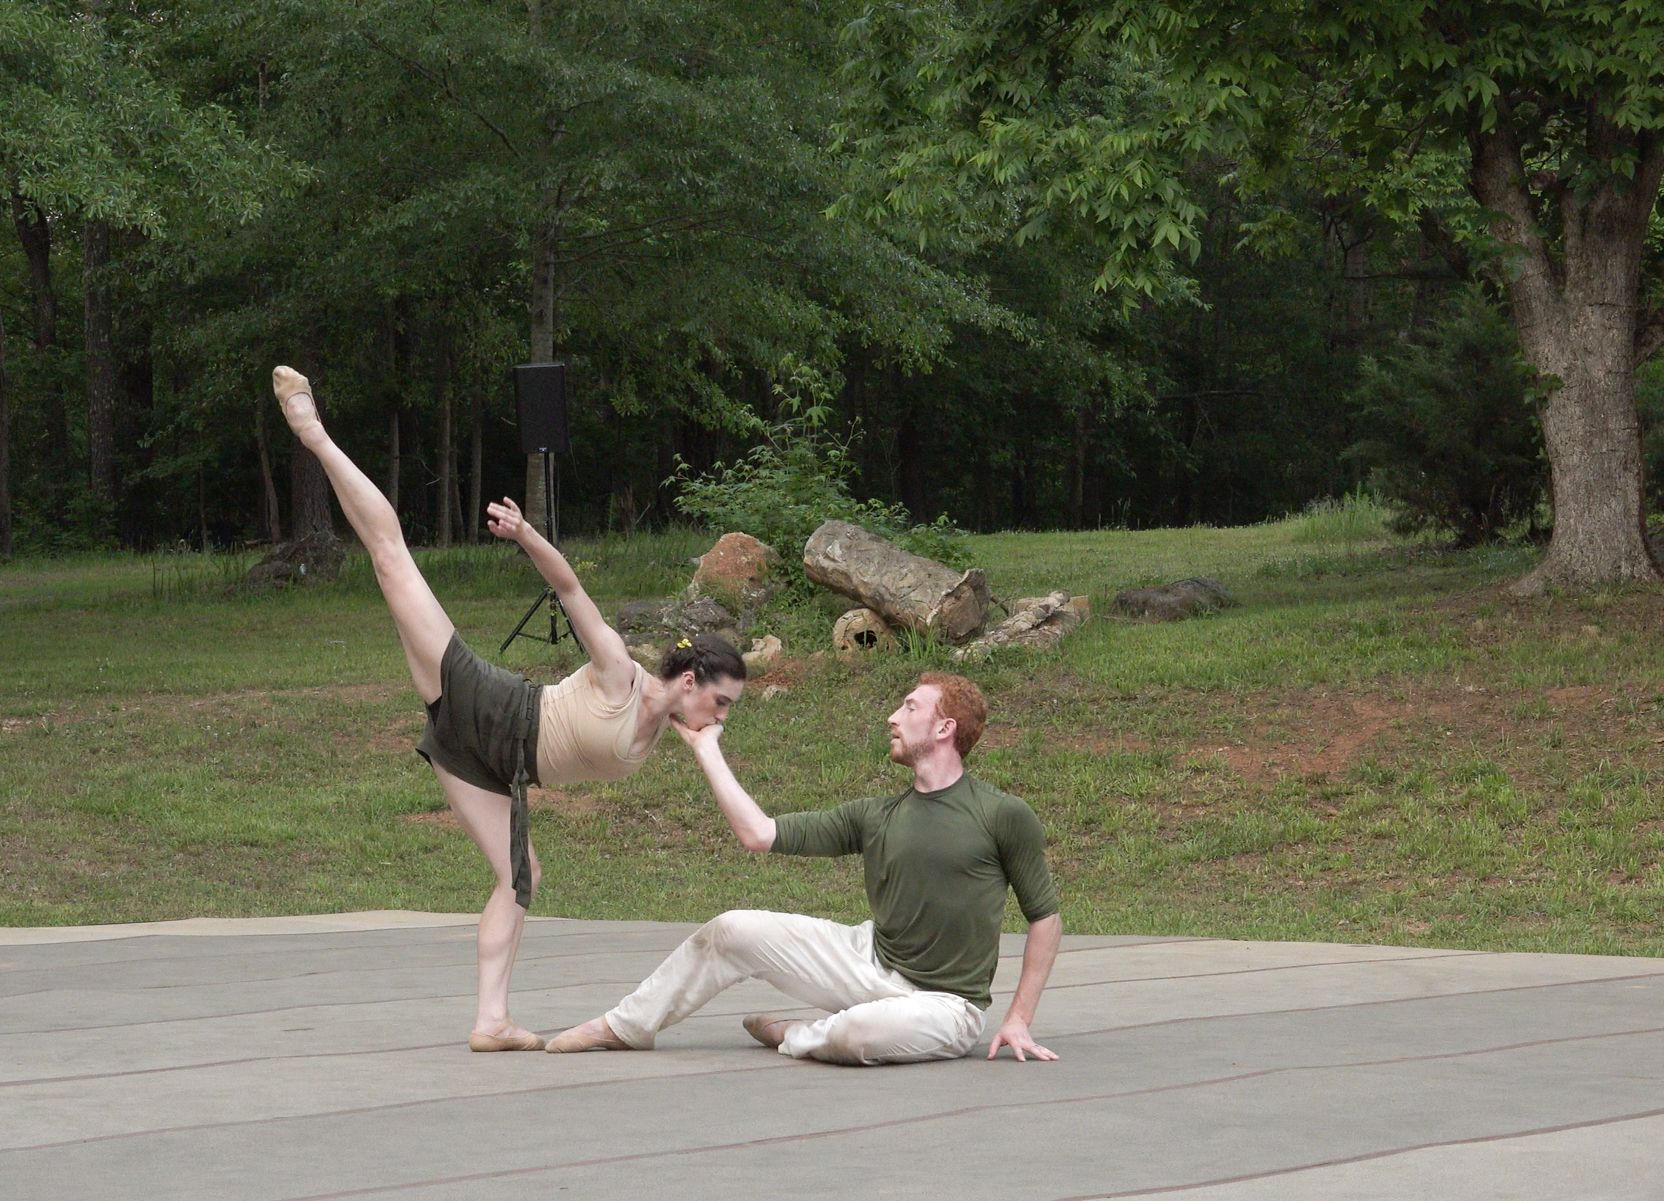 Terminus Modern Ballet Theater performers Laura Morton and Heath Gill perform against a lush outdoor backdrop "roam."Courtesy of Terminus Modern Ballet Theatre